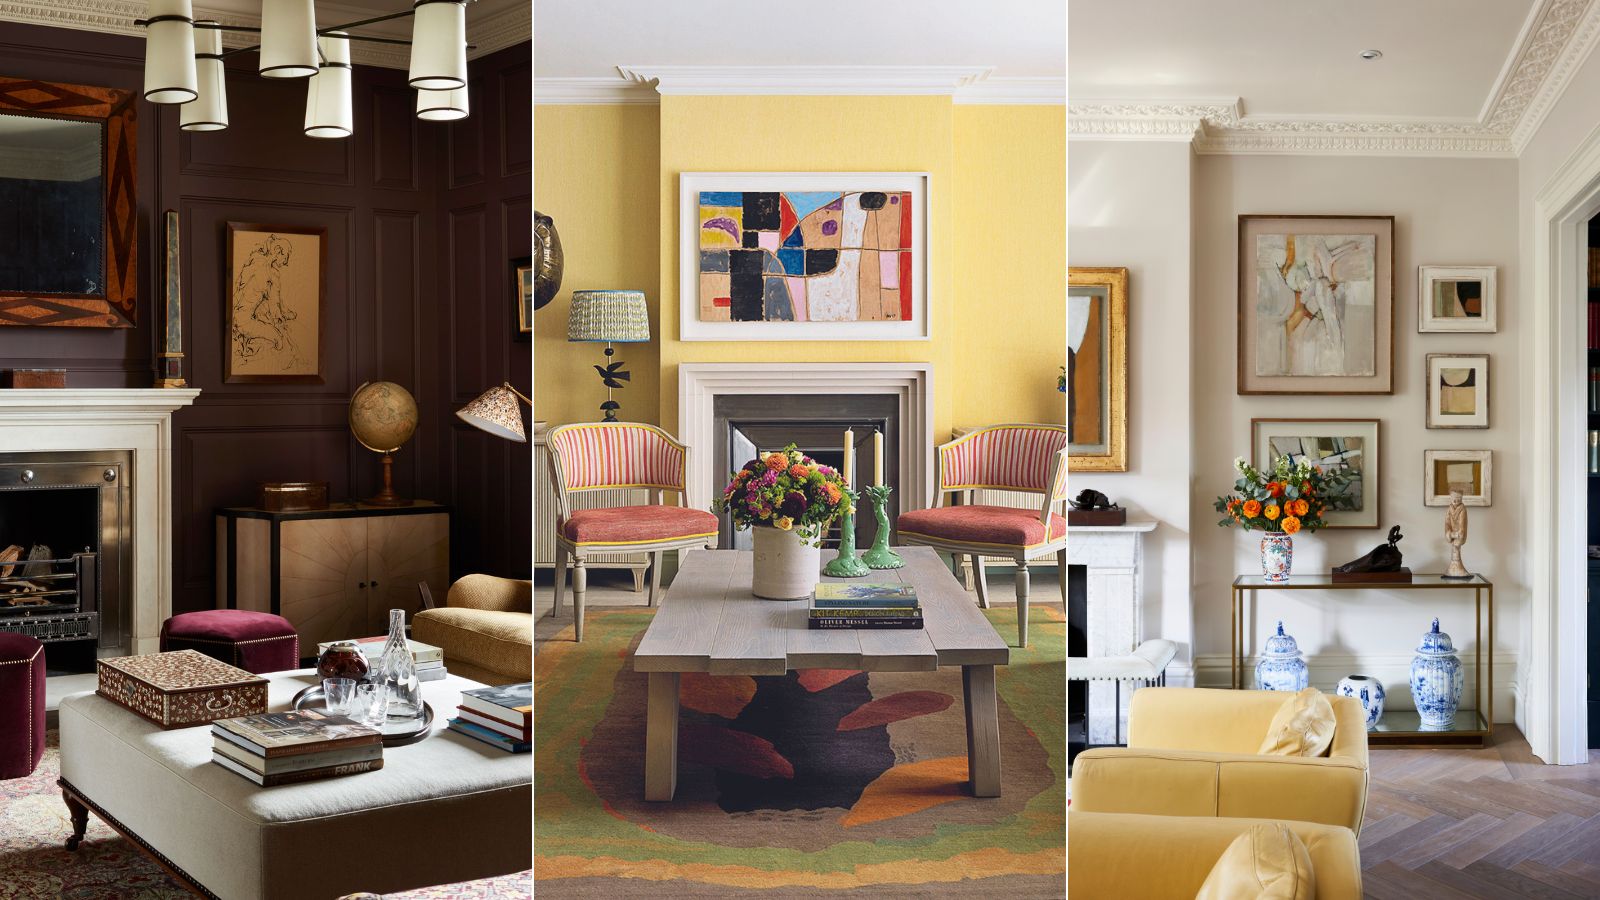 What Colour goes well in the living room? – The Home Answer